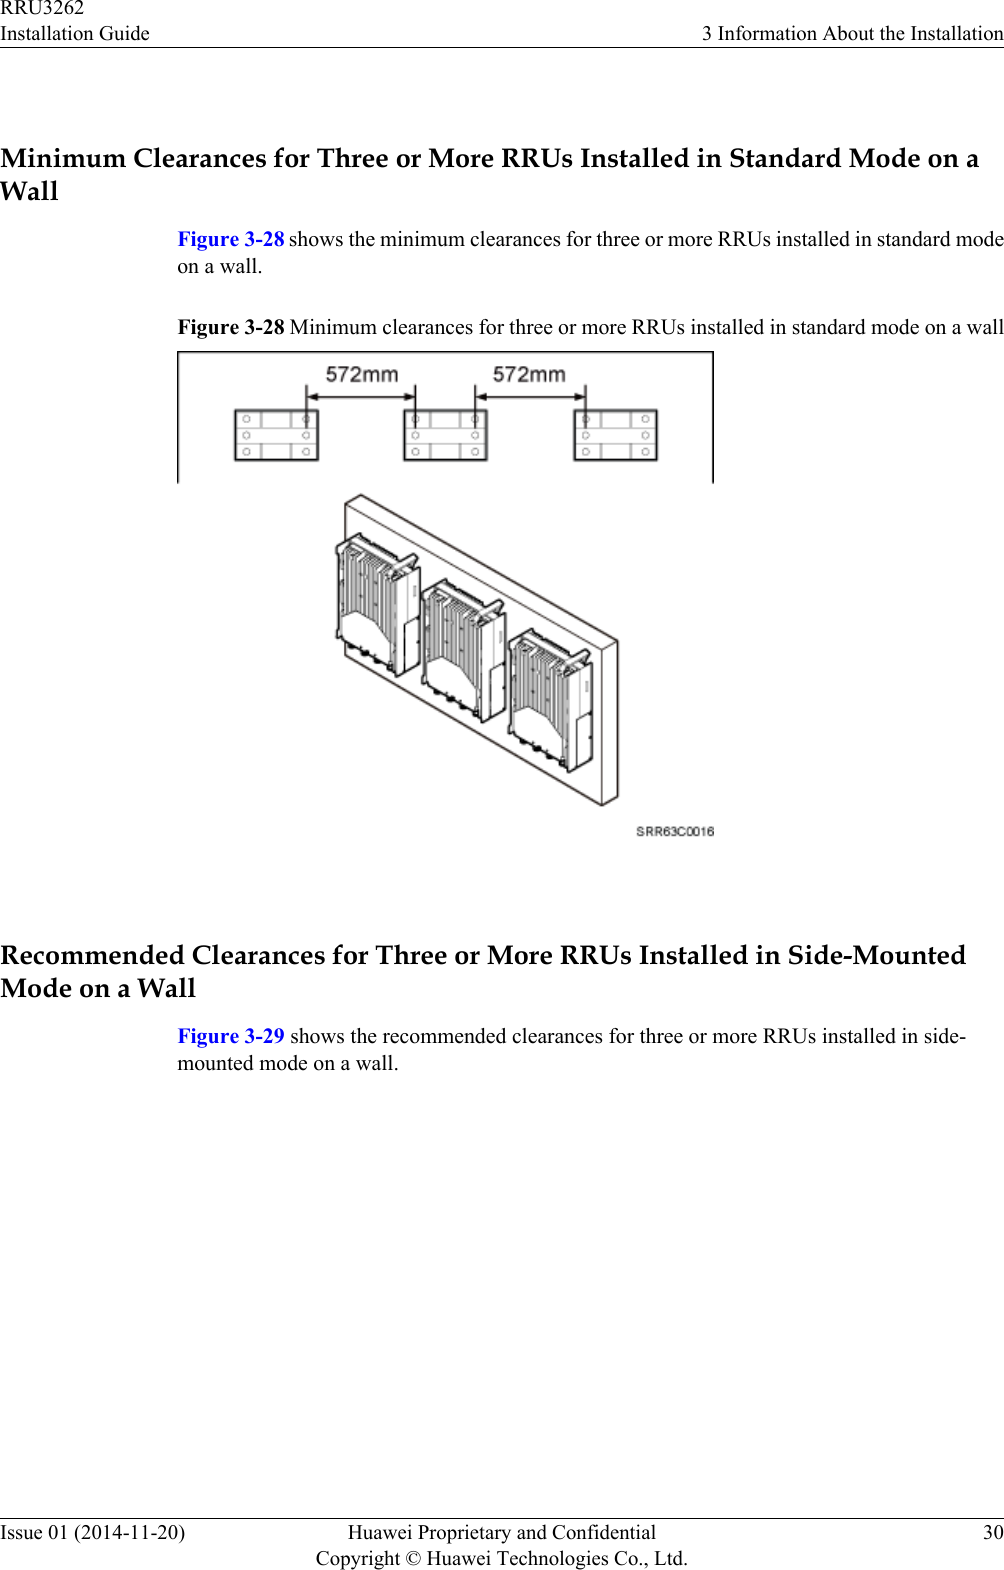  Minimum Clearances for Three or More RRUs Installed in Standard Mode on aWallFigure 3-28 shows the minimum clearances for three or more RRUs installed in standard modeon a wall.Figure 3-28 Minimum clearances for three or more RRUs installed in standard mode on a wall Recommended Clearances for Three or More RRUs Installed in Side-MountedMode on a WallFigure 3-29 shows the recommended clearances for three or more RRUs installed in side-mounted mode on a wall.RRU3262Installation Guide 3 Information About the InstallationIssue 01 (2014-11-20) Huawei Proprietary and ConfidentialCopyright © Huawei Technologies Co., Ltd.30